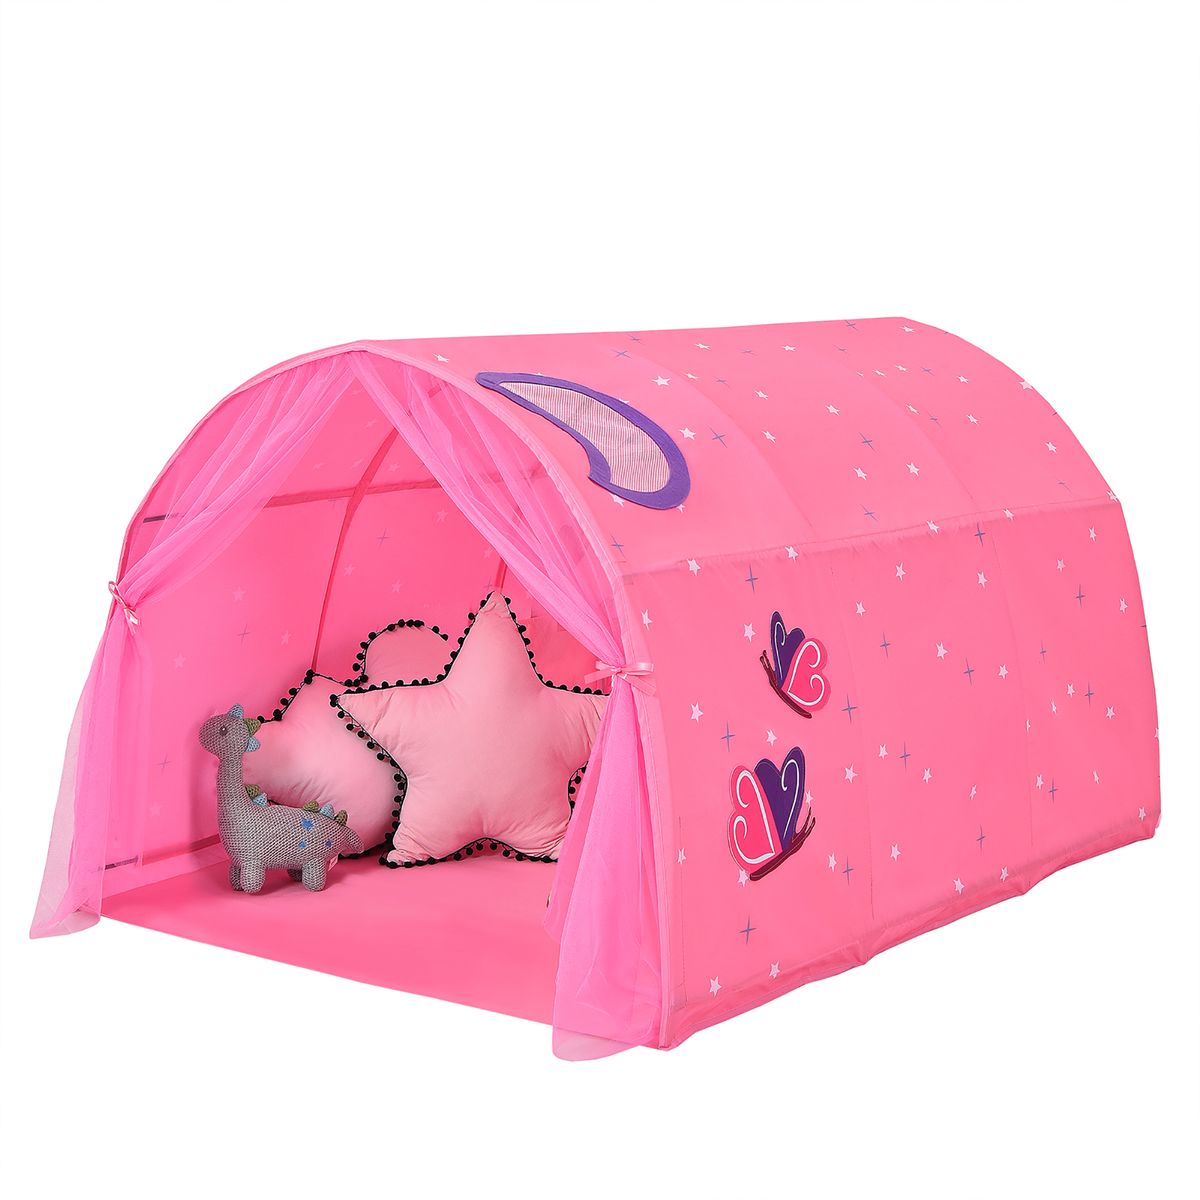 Photos - Playhouse / Play Tent Goplus Costway Kids Bed Tent Playhouse with Carry Bag - Pink TY328040PI